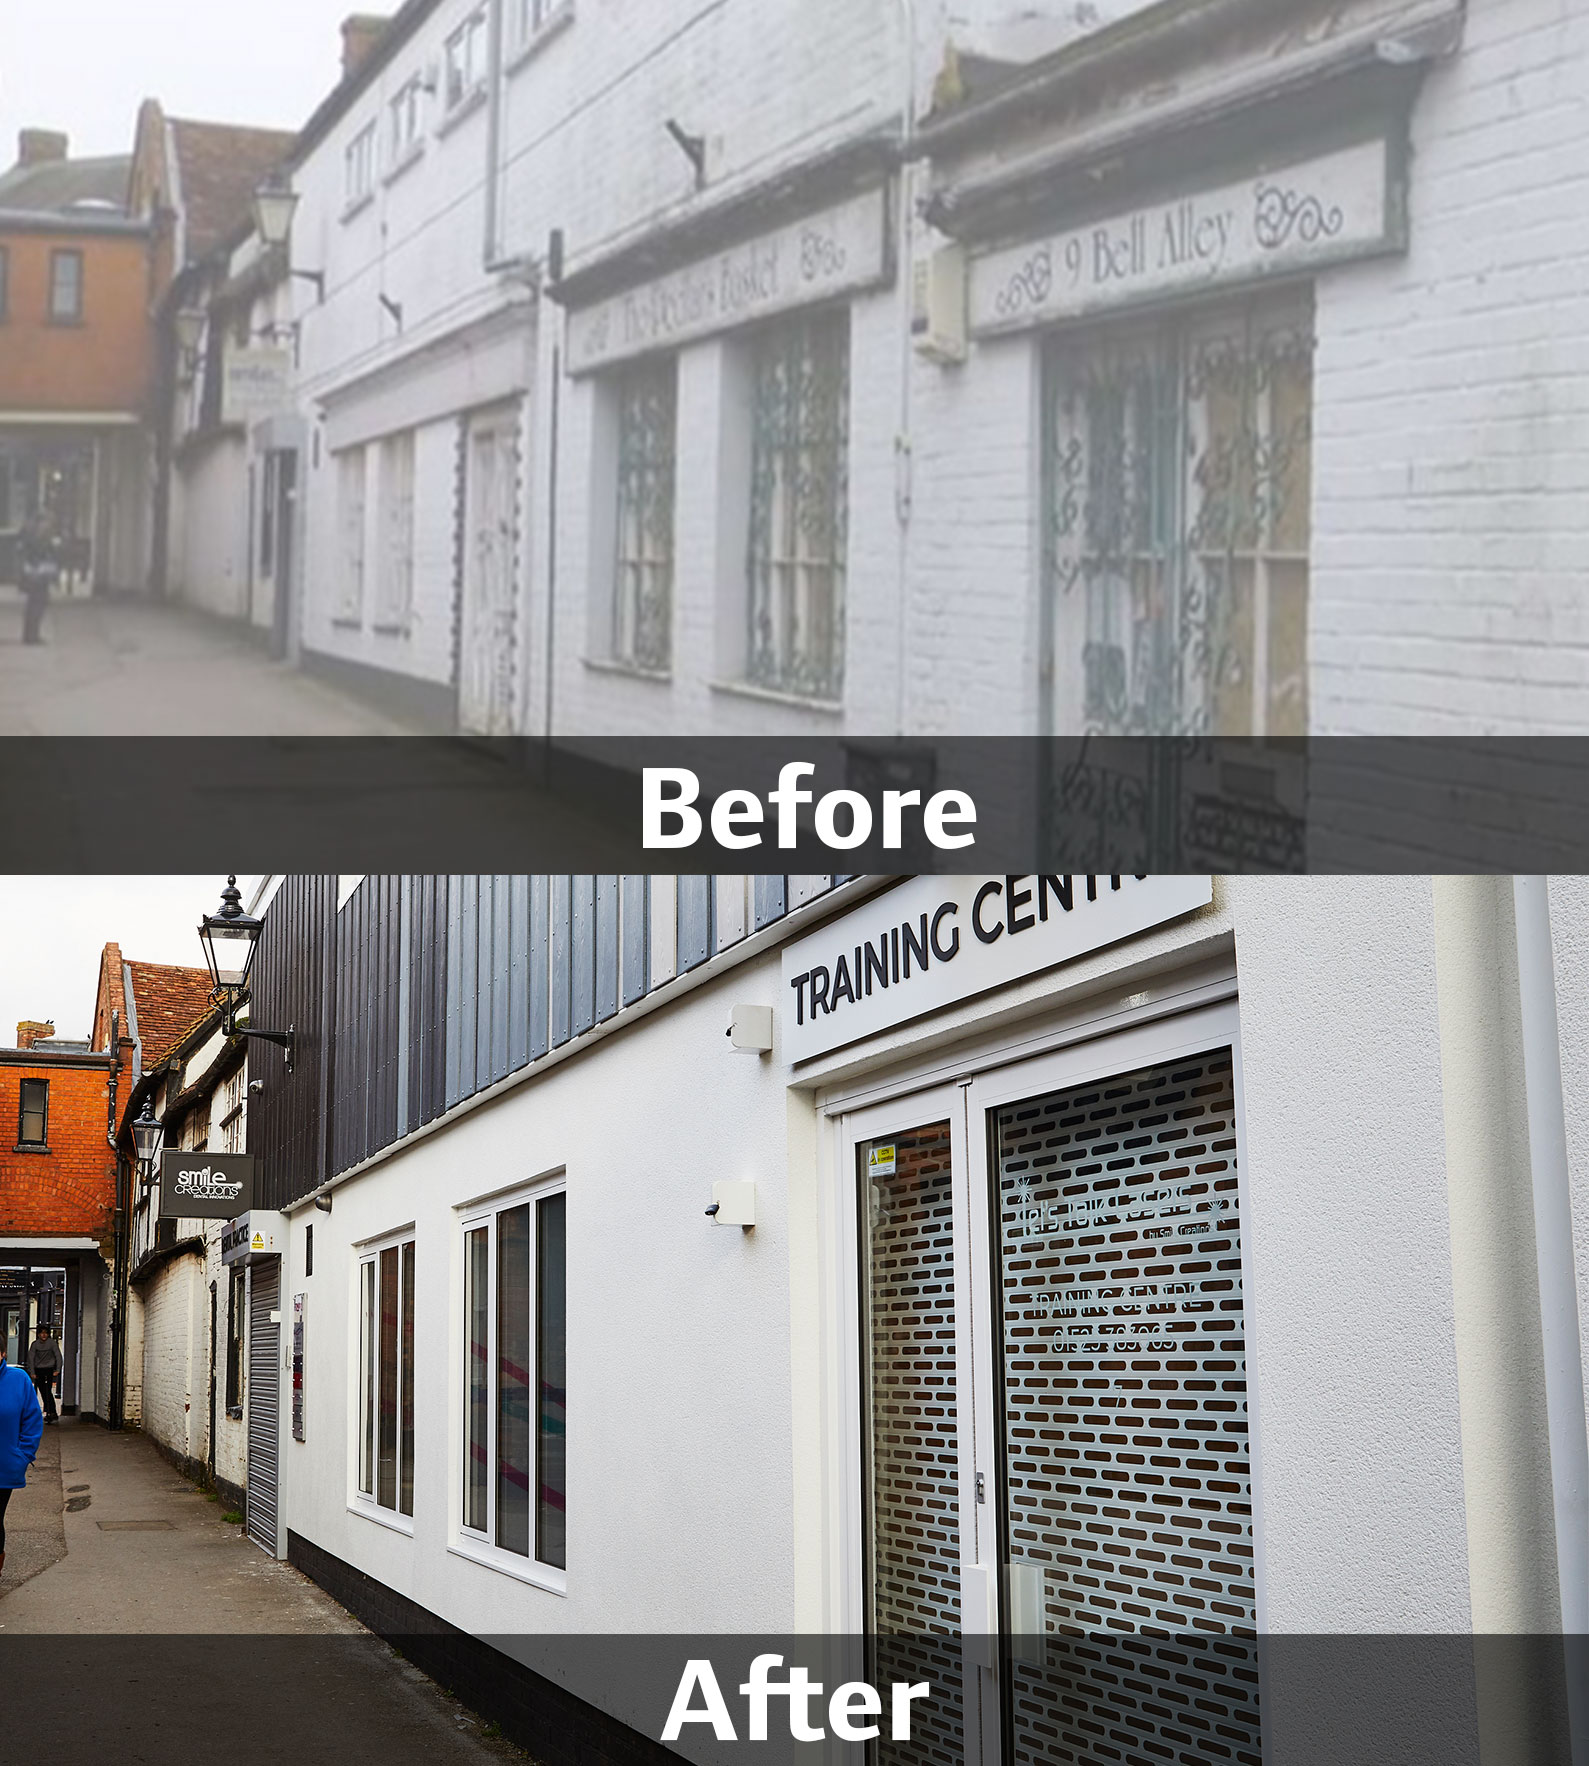 Smile Creations, Leighton Buzzard, before and after